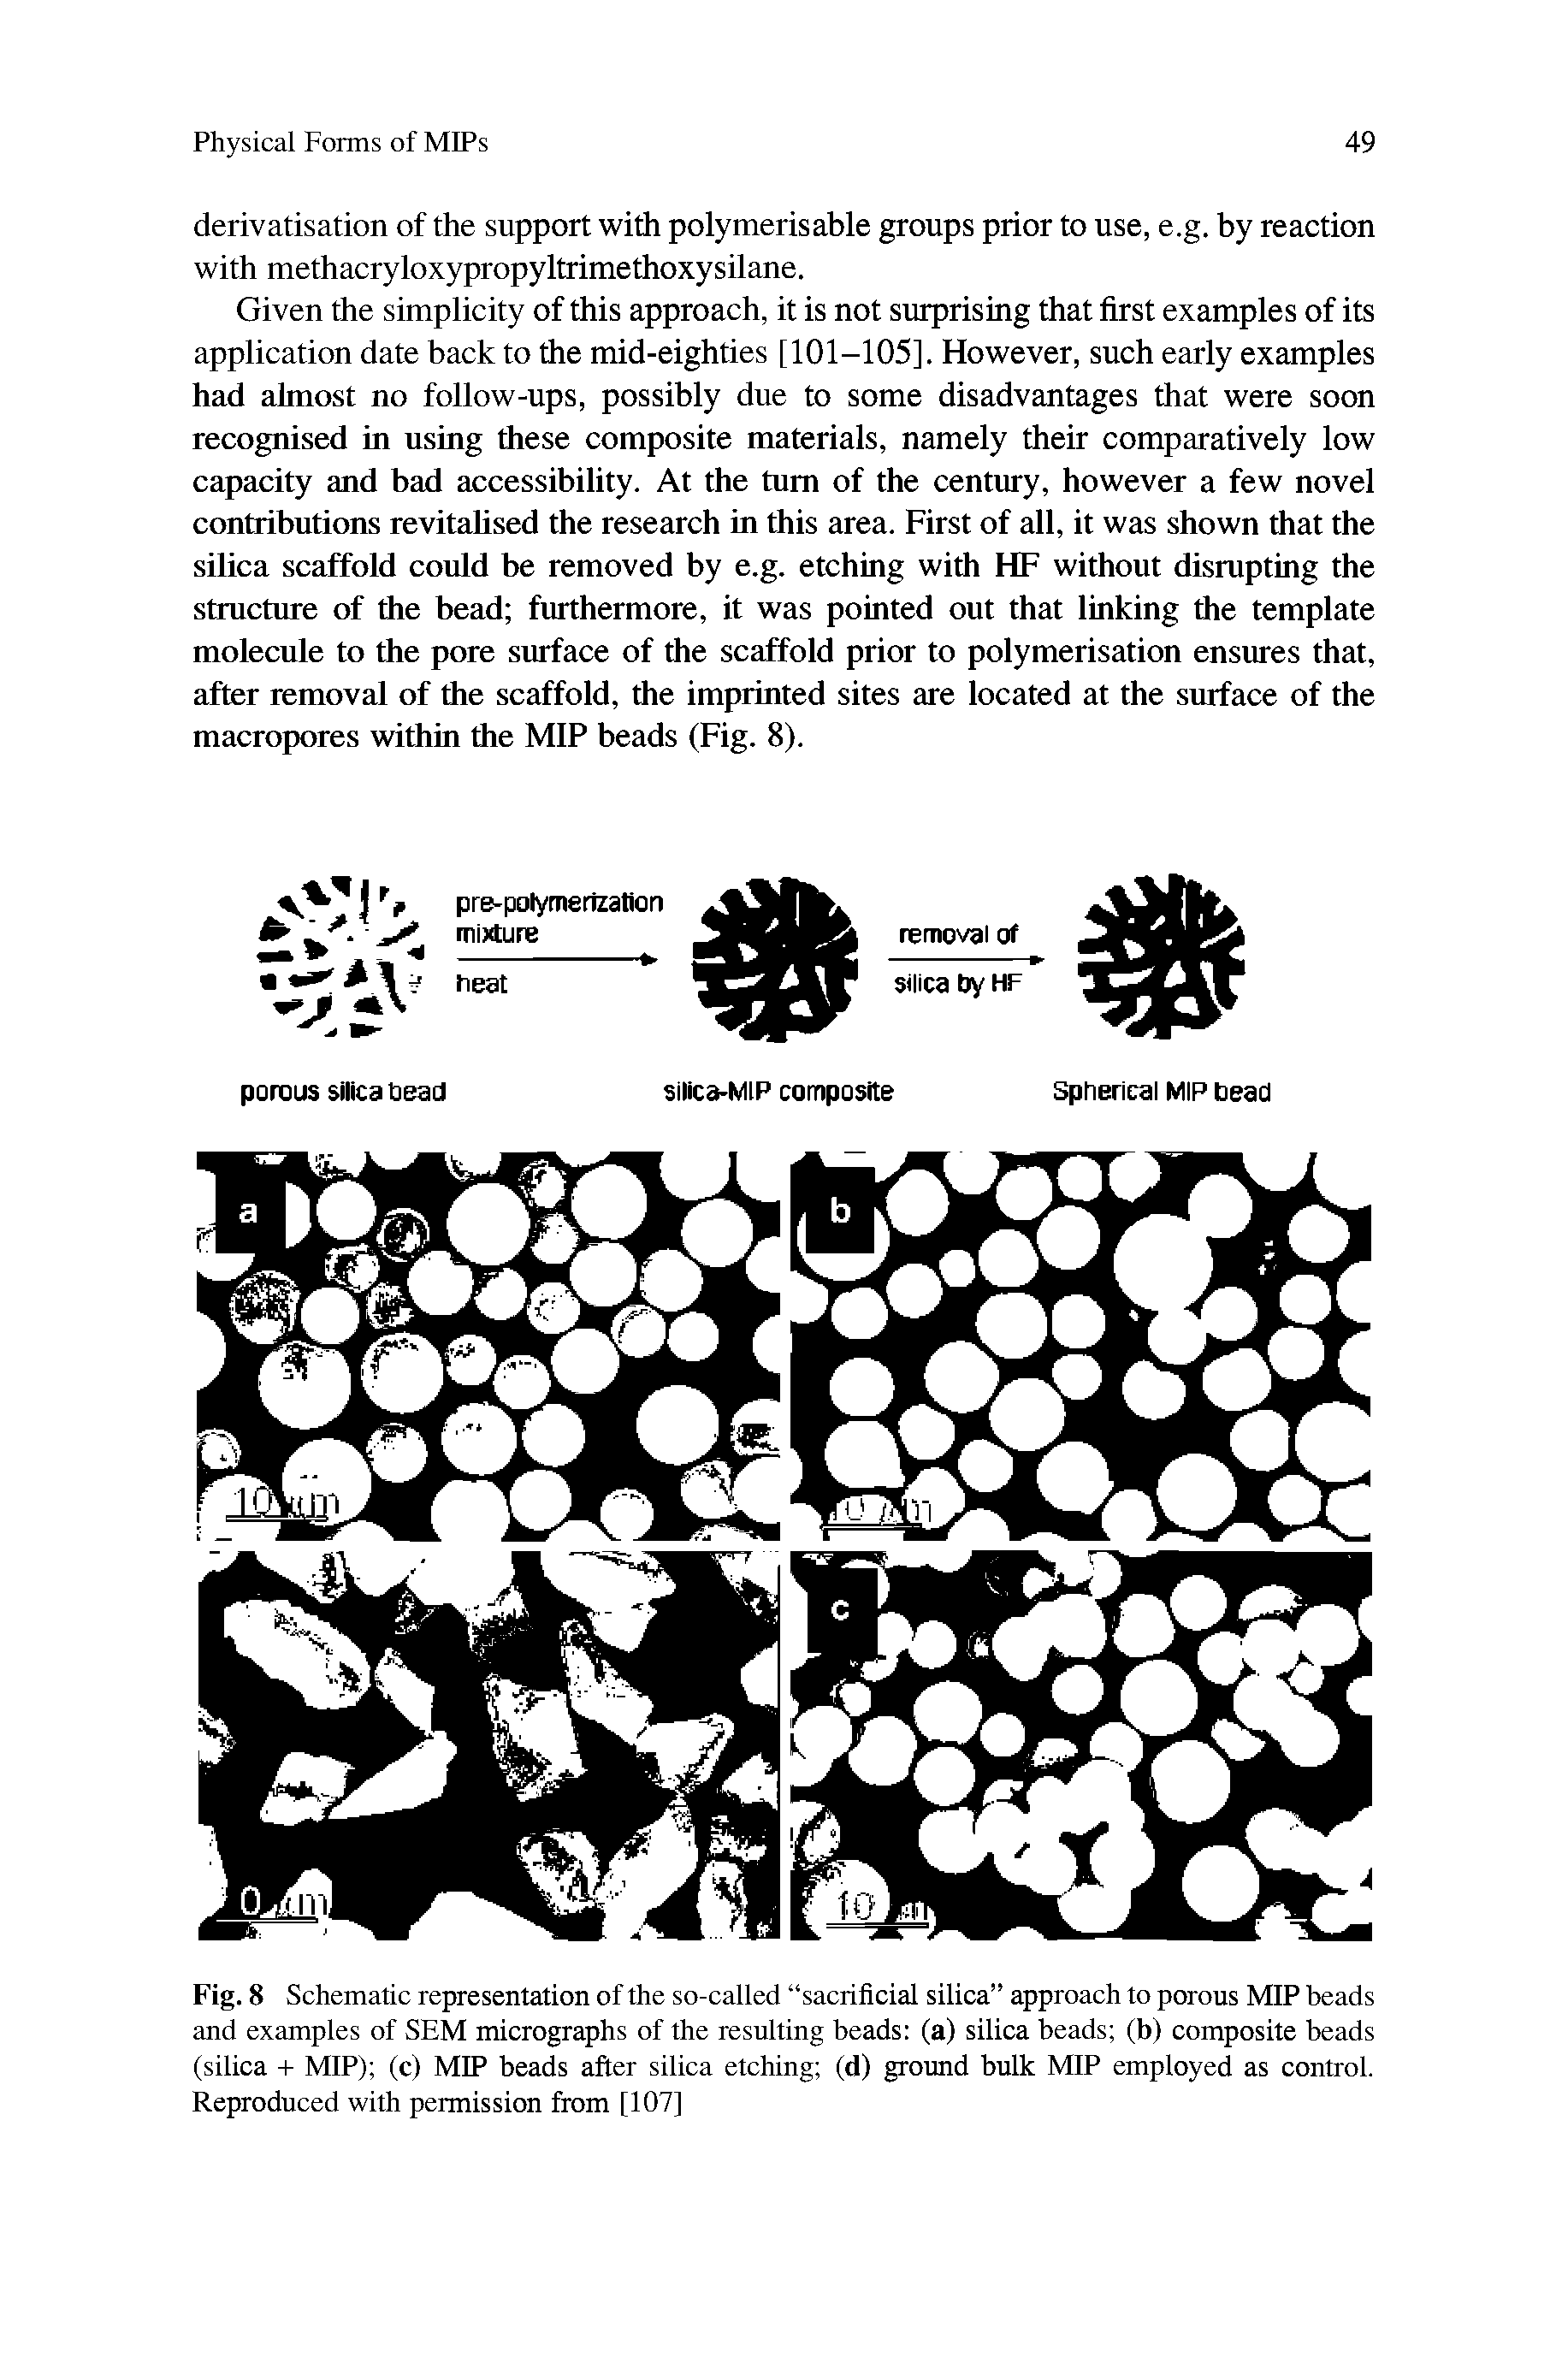 Fig. 8 Schematic representation of the so-called sacrificial silica approach to porous MIP beads and examples of SEM micrographs of the resulting beads (a) silica beads (b) composite beads (silica + MIP) (c) MIP beads after silica etching (d) ground bulk MIP employed as control. Reproduced with permission from [107]...